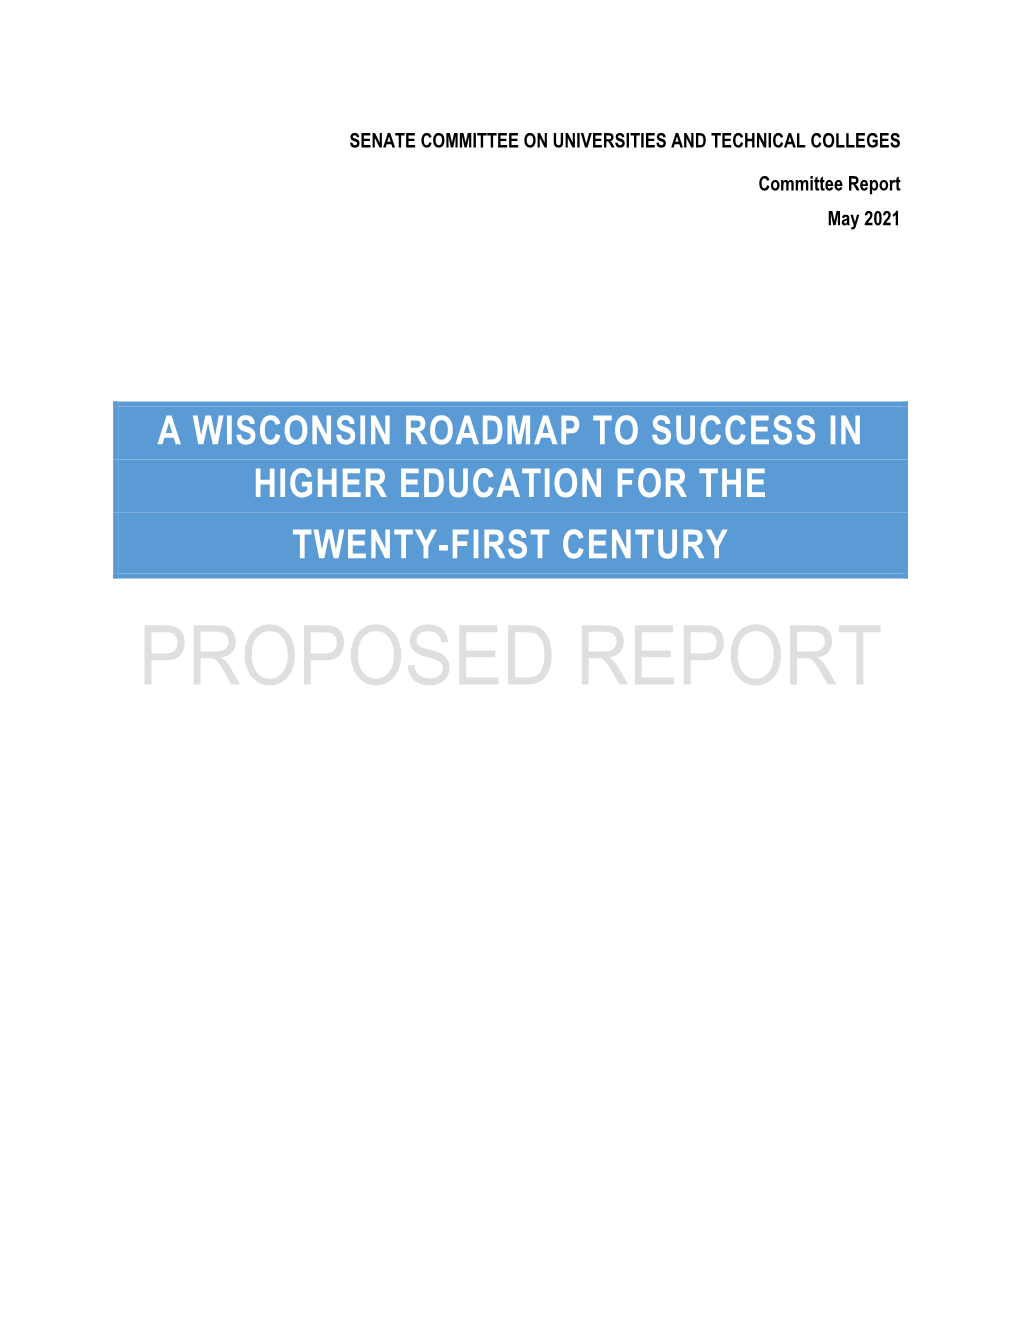 A Wisconsin Roadmap to Success in Higher Education for the Twenty-First Century